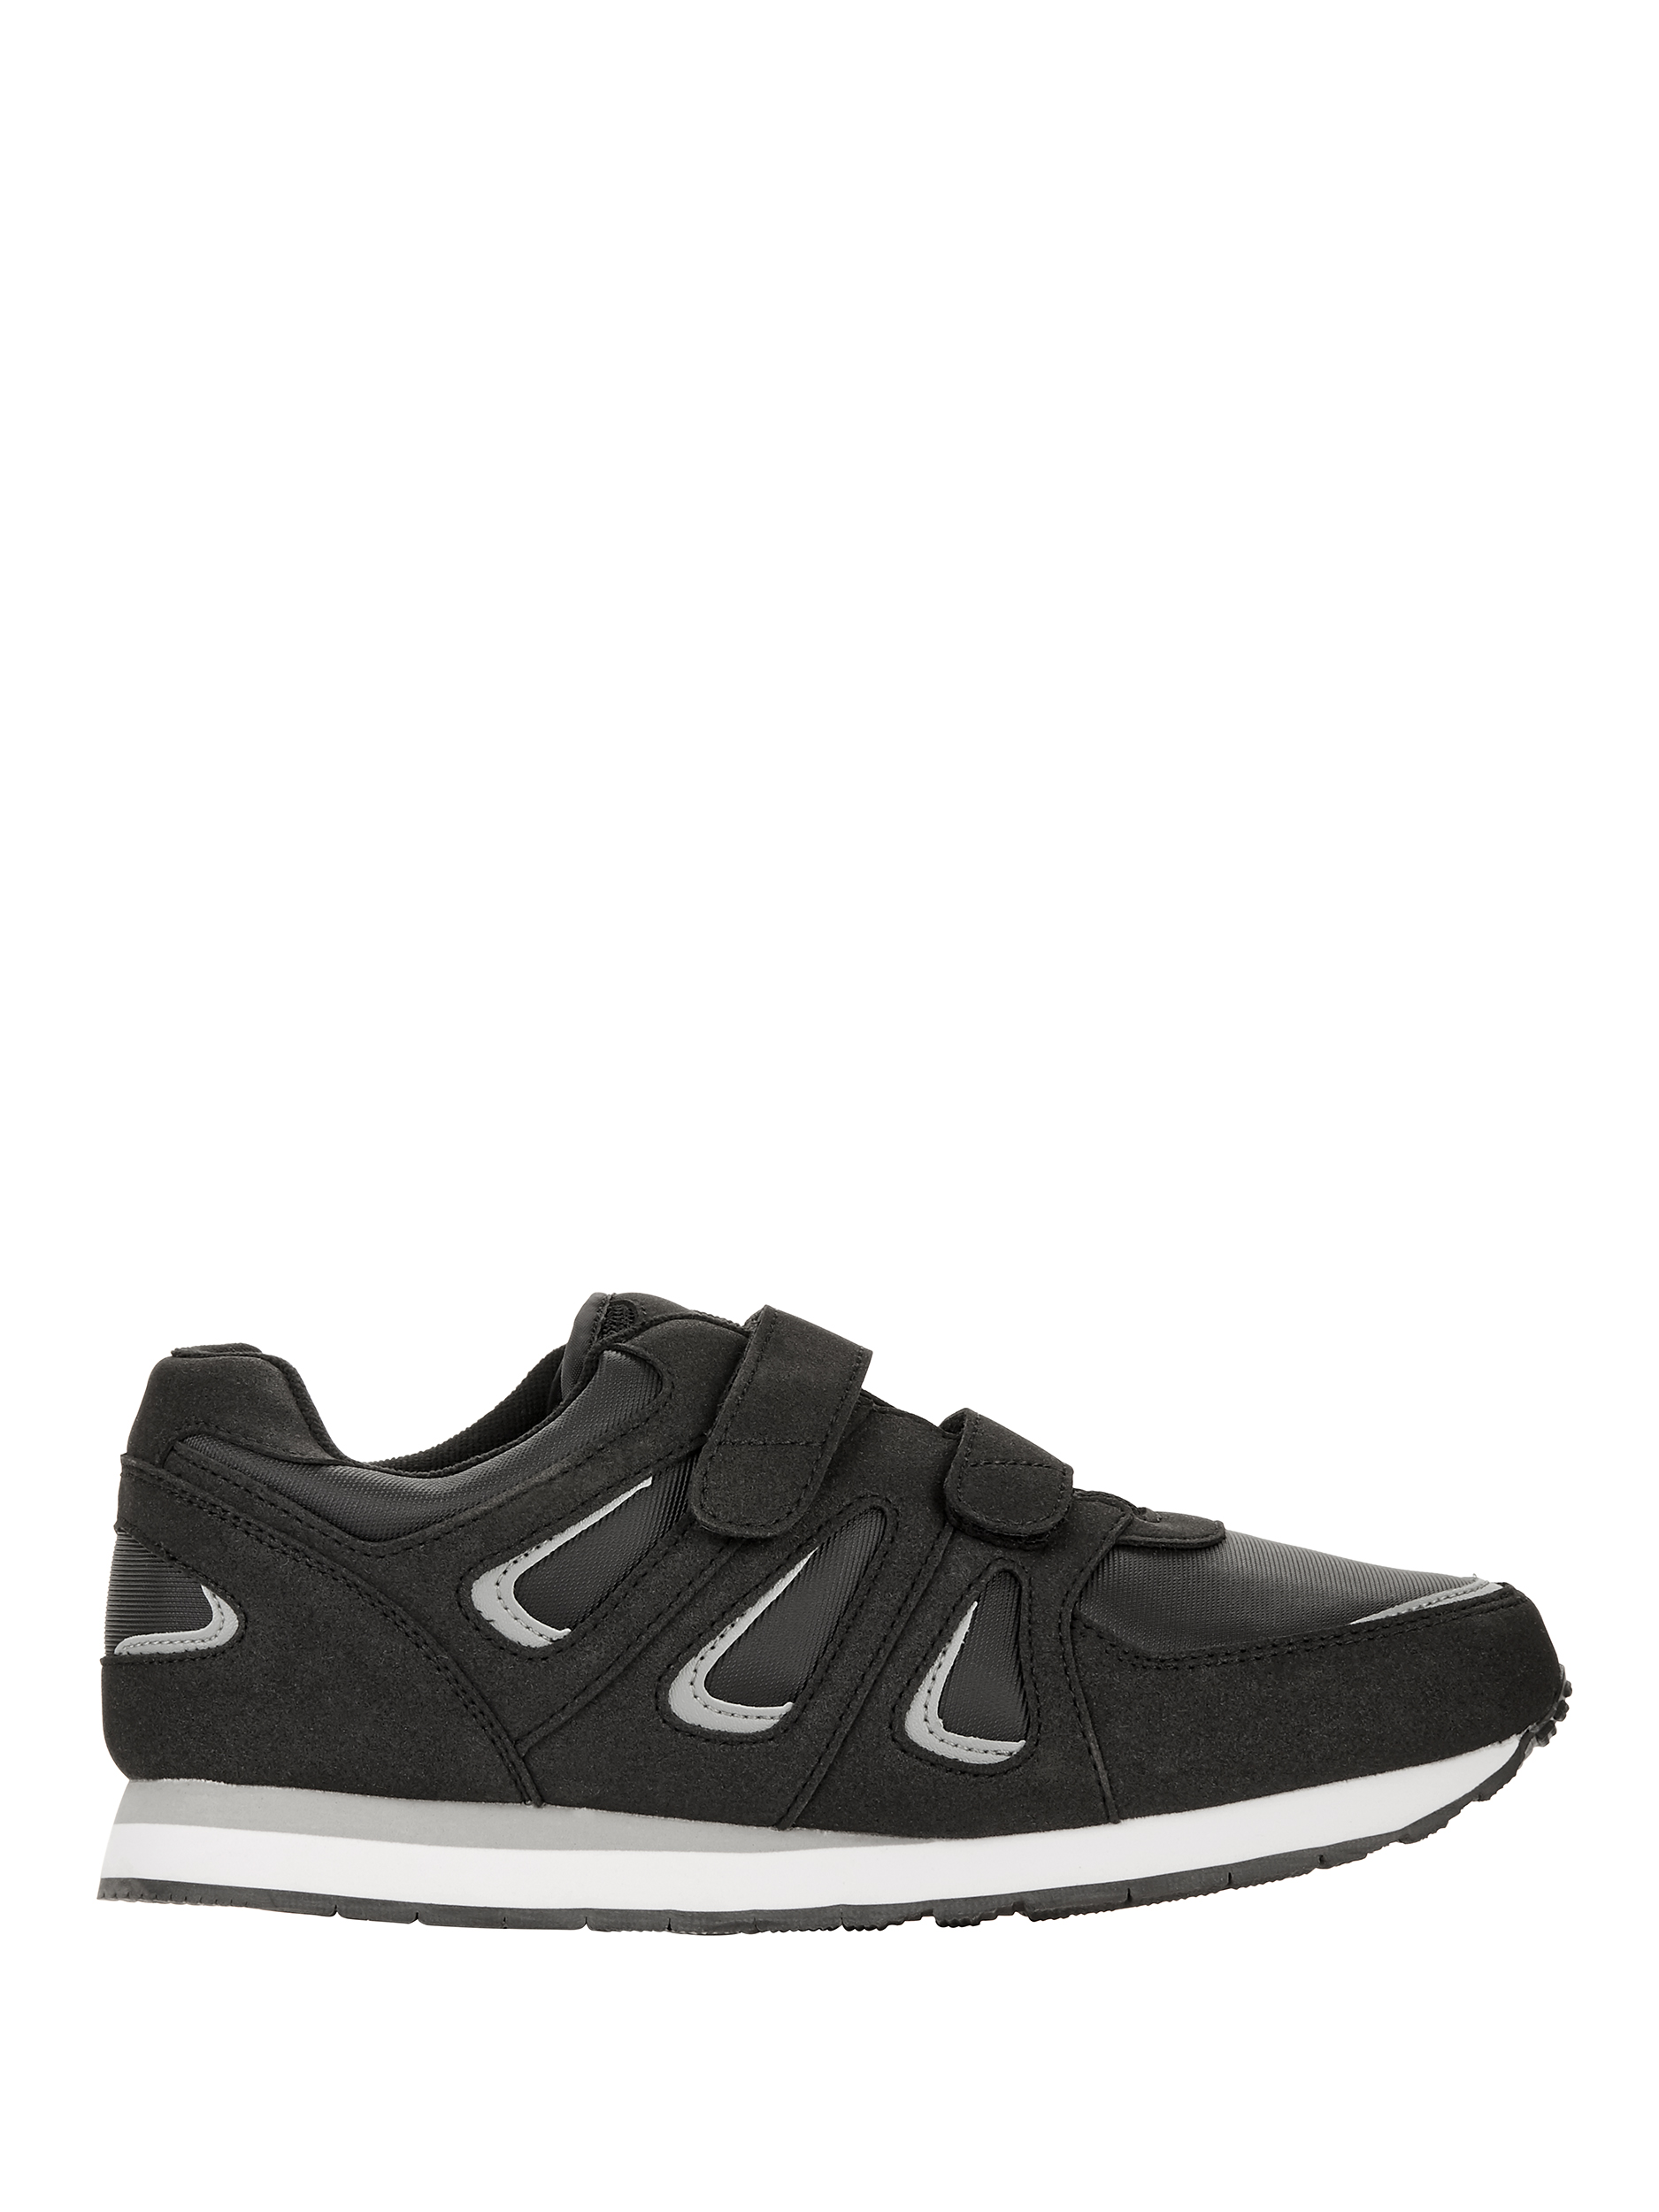 Athletic Works Men's Silver Series Athletic Shoe - image 3 of 7